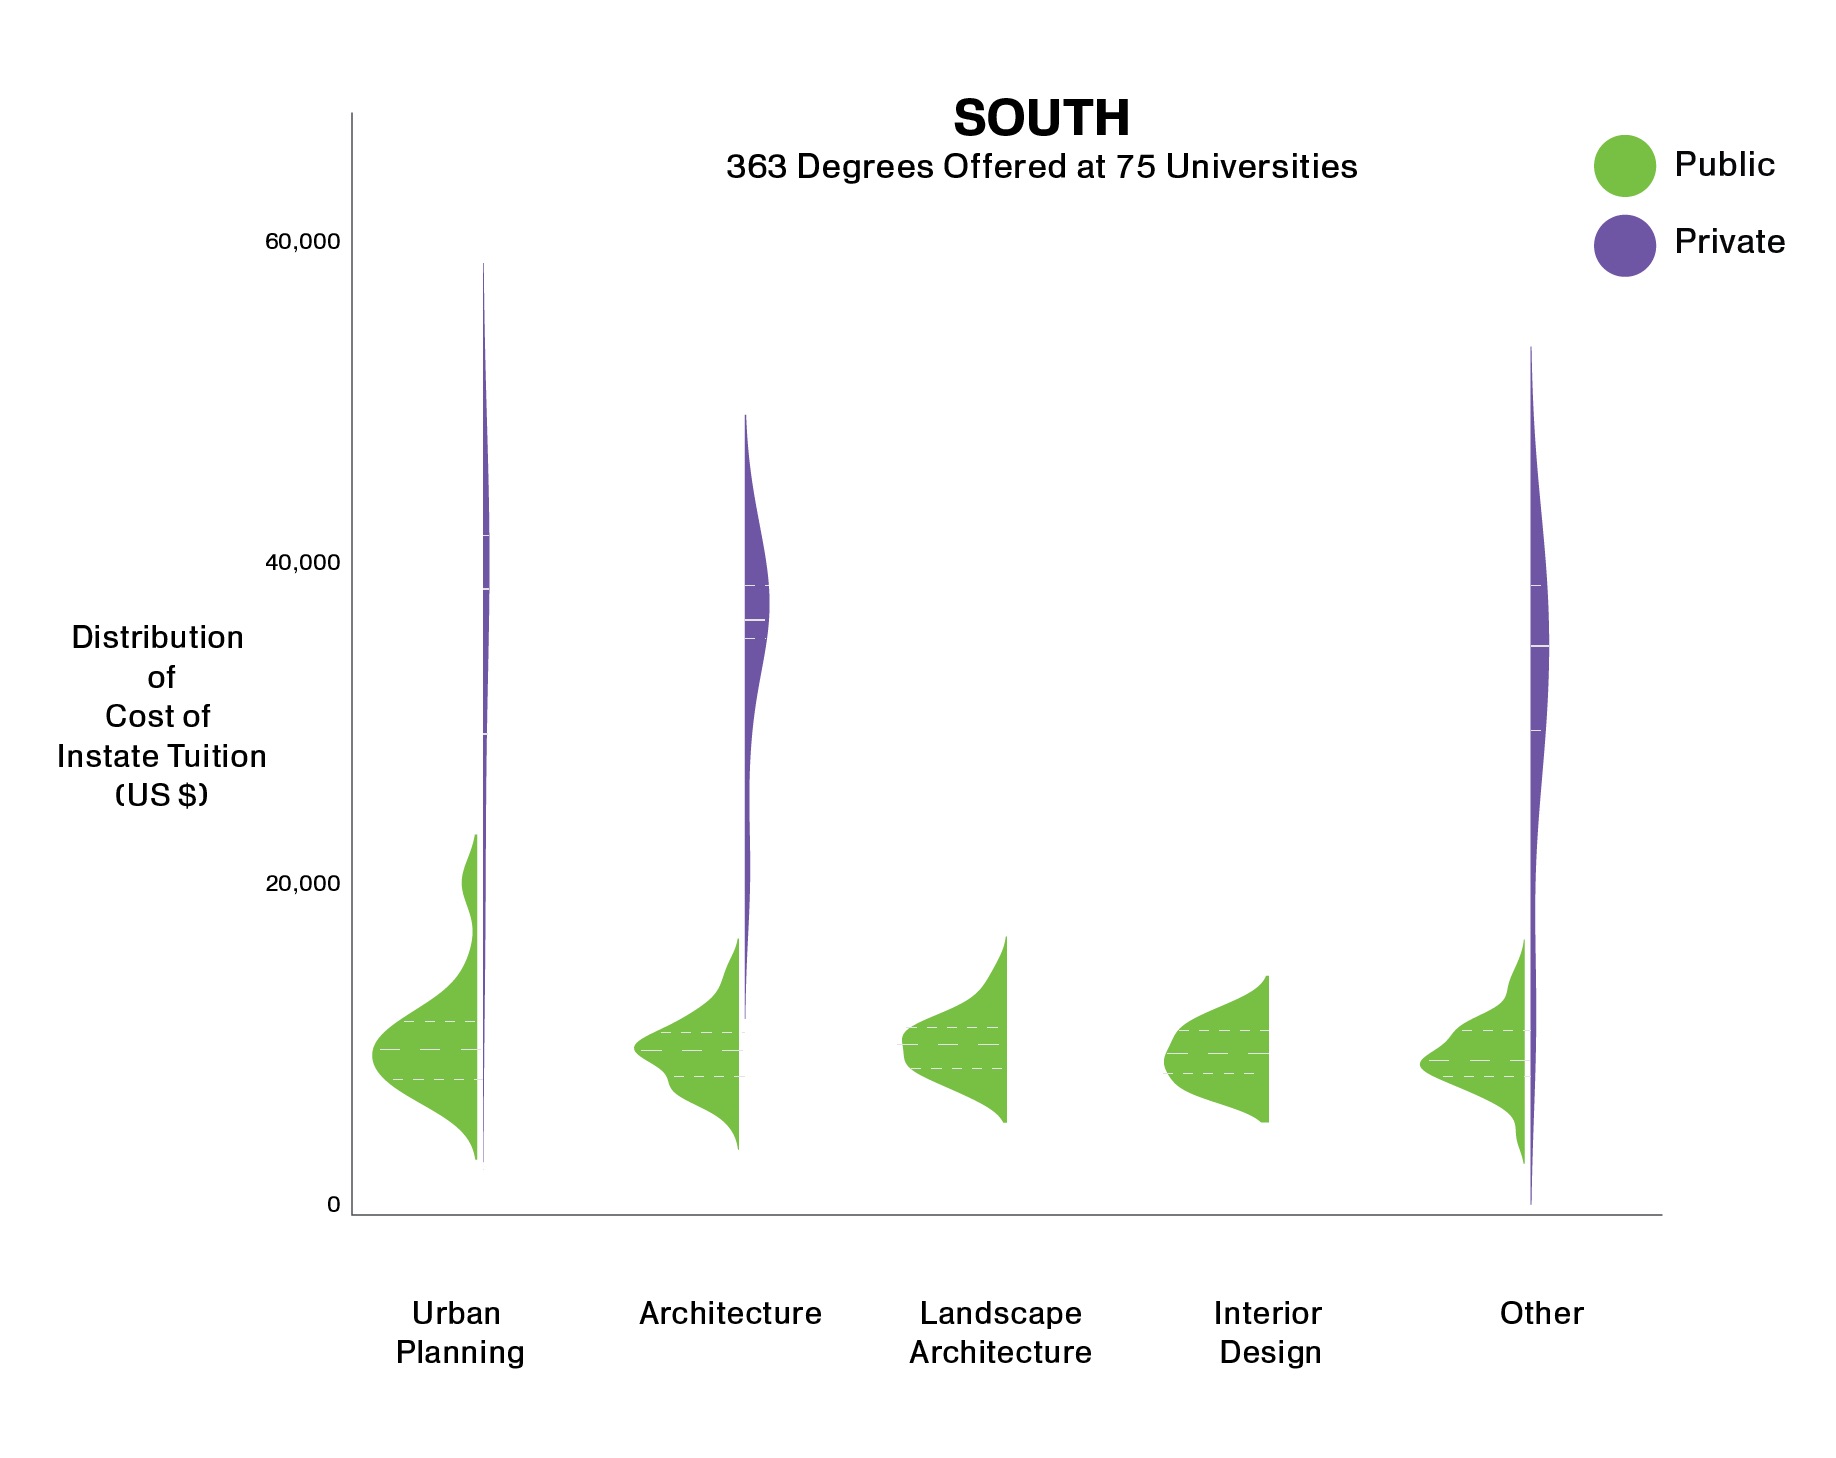 Comparison of Tuition Costs in the South by Area of Study